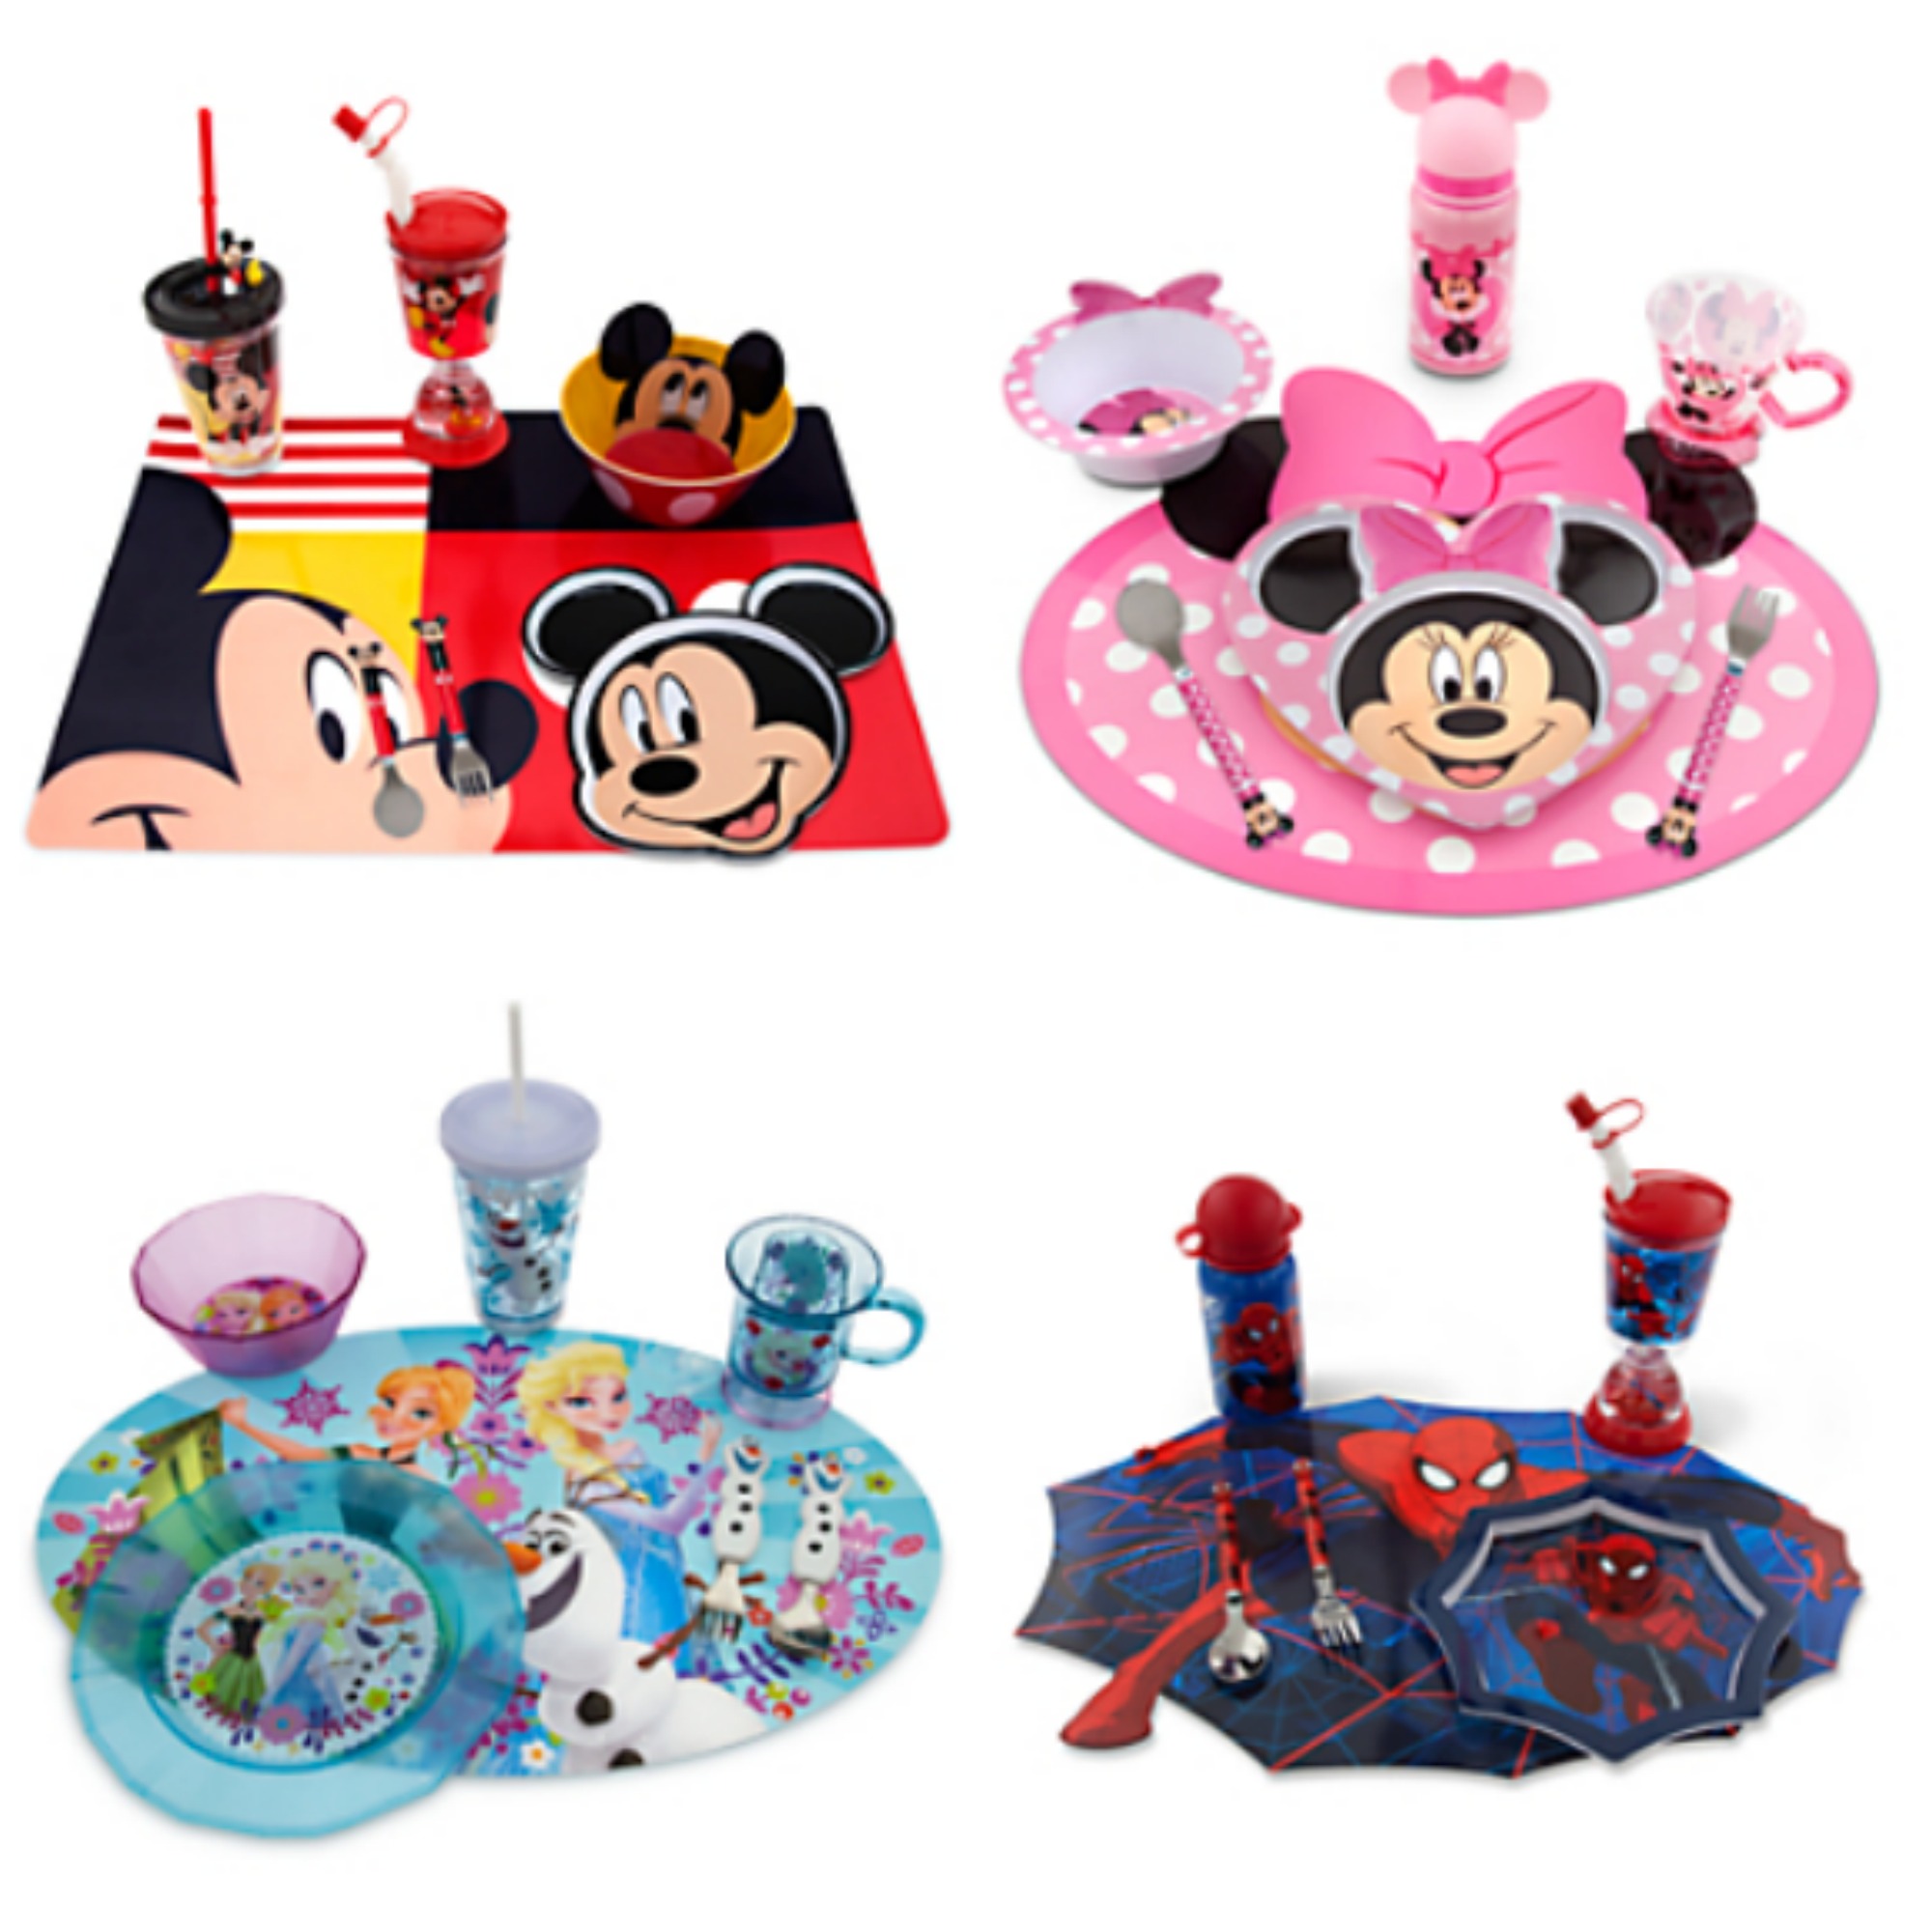 Celebrate a little mealtime magic with Disney